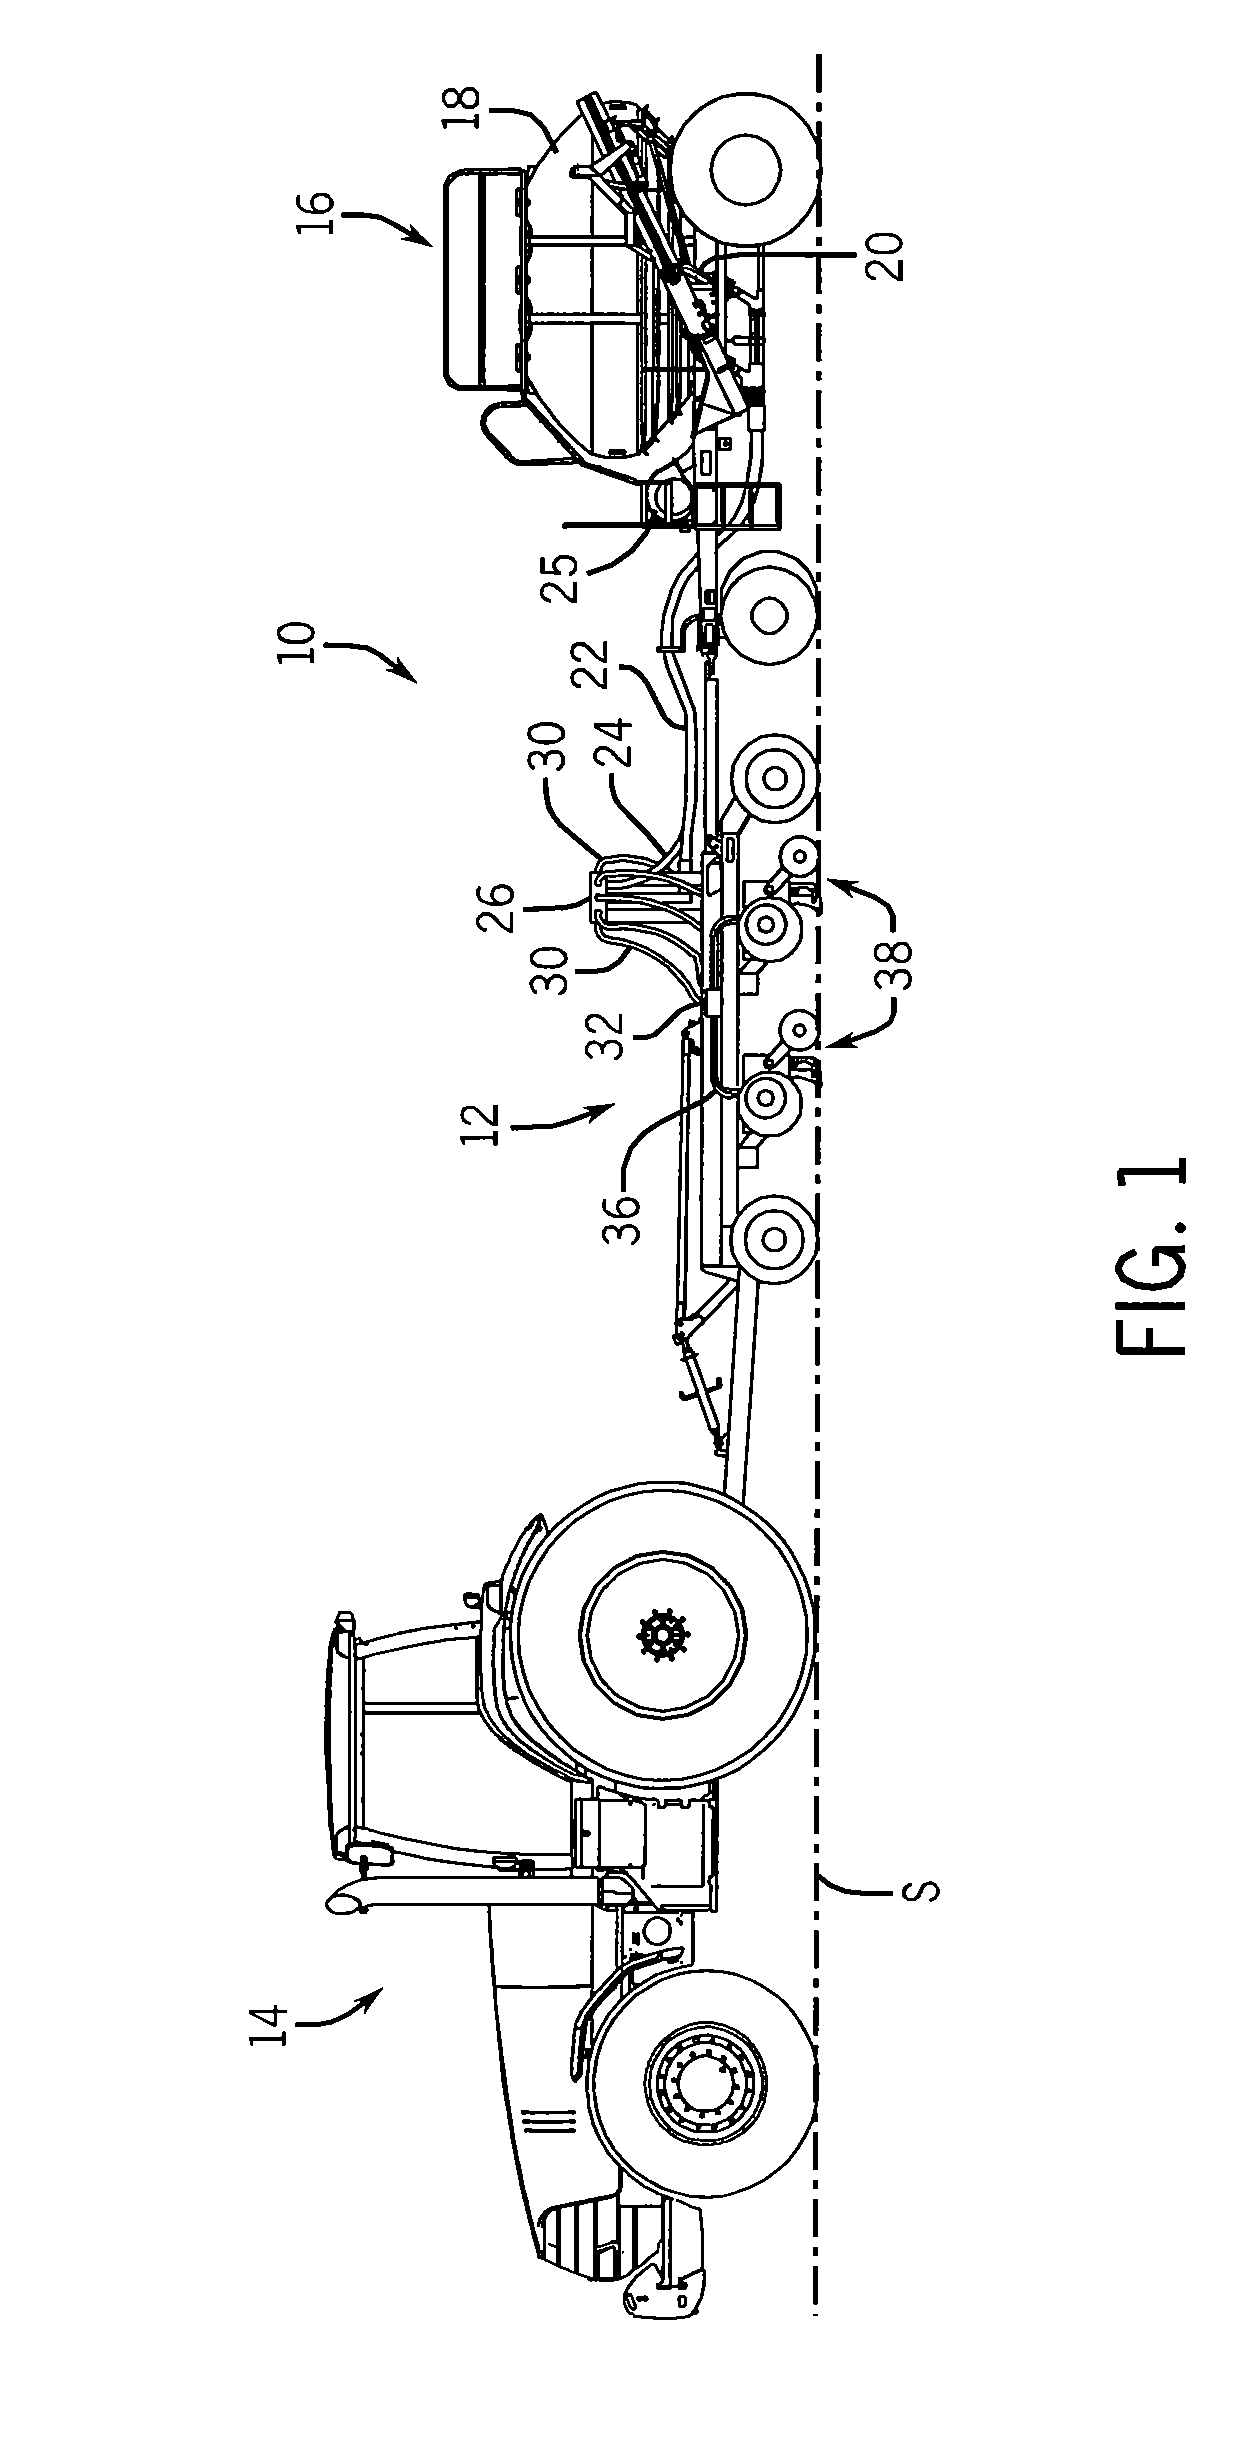 Method And Apparatus For Sectional Control Of Air Seeder Distribution System For A Farm Implement